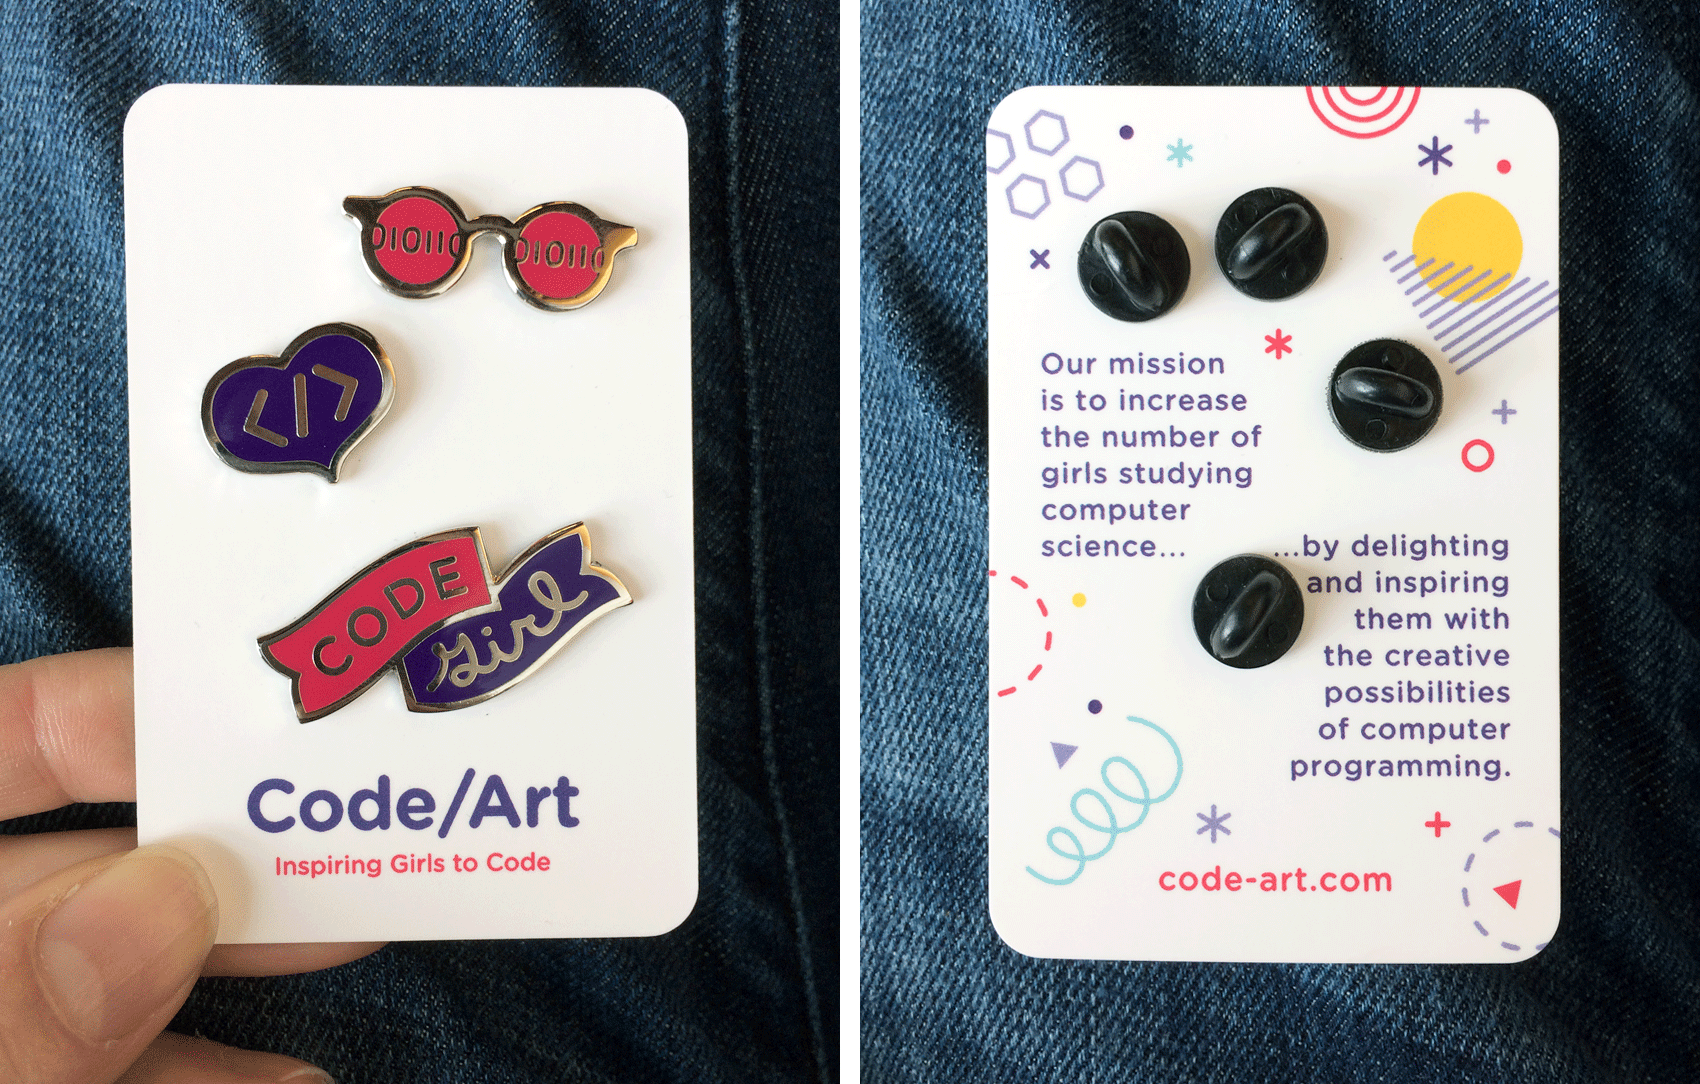 enamel pins for girls who code - a "code girl" banner, </> heart, and code sunglasses